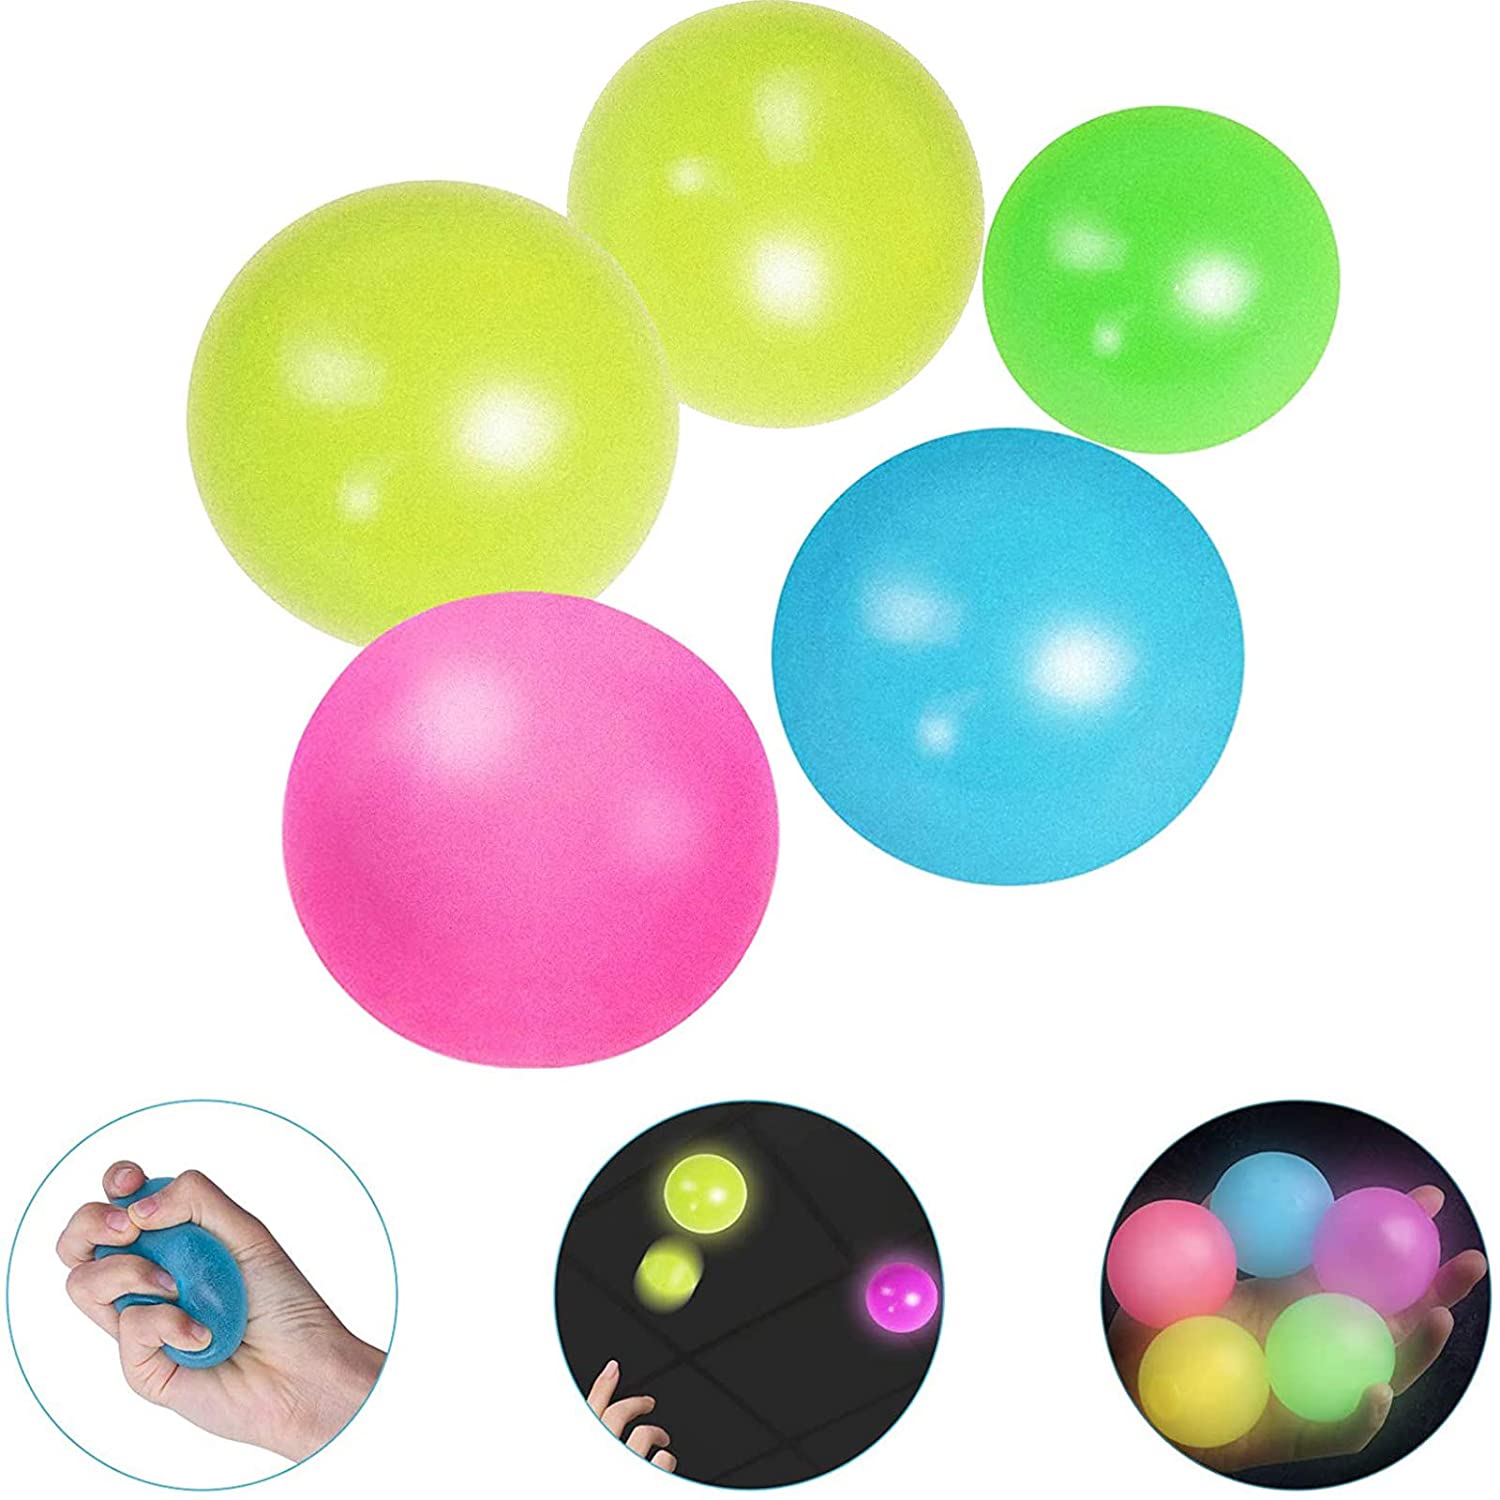 OCD Anxiety Fun Squishy Toys for ADHD Glow Balls Sticky Wall Balls Stress Relief Balls Sticky Ceiling Balls Glow Stress Toys Stick to The Wall and Slowly Fall Off for Kids Adults 